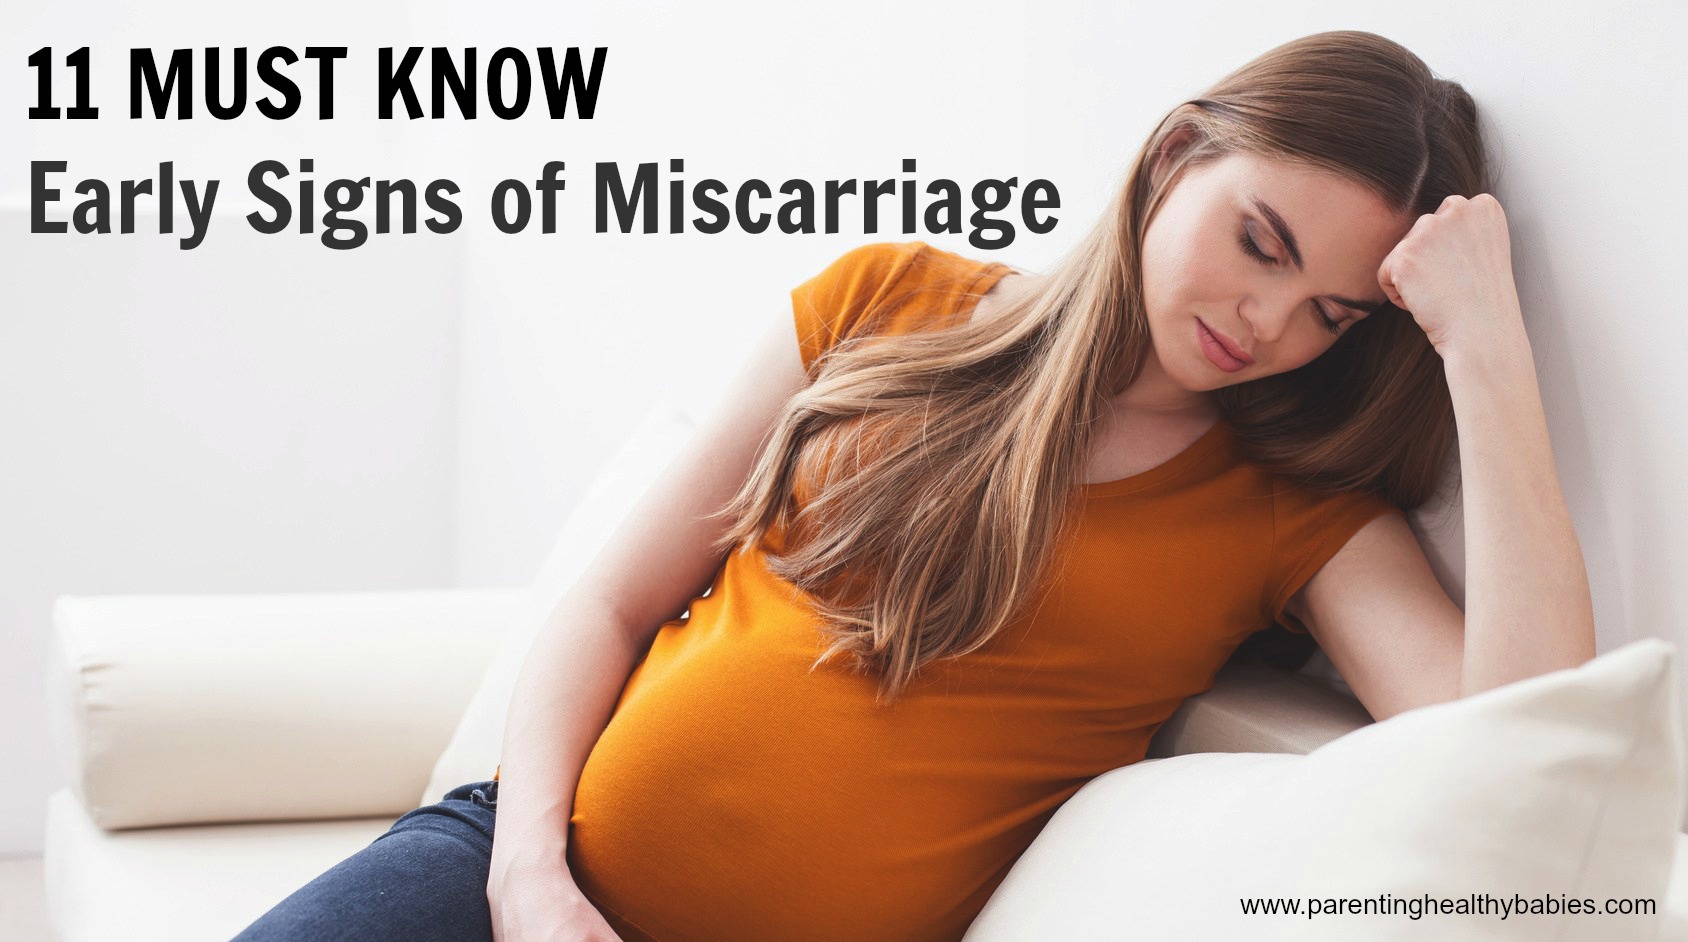 11 Must Know Early Signs of Miscarriage